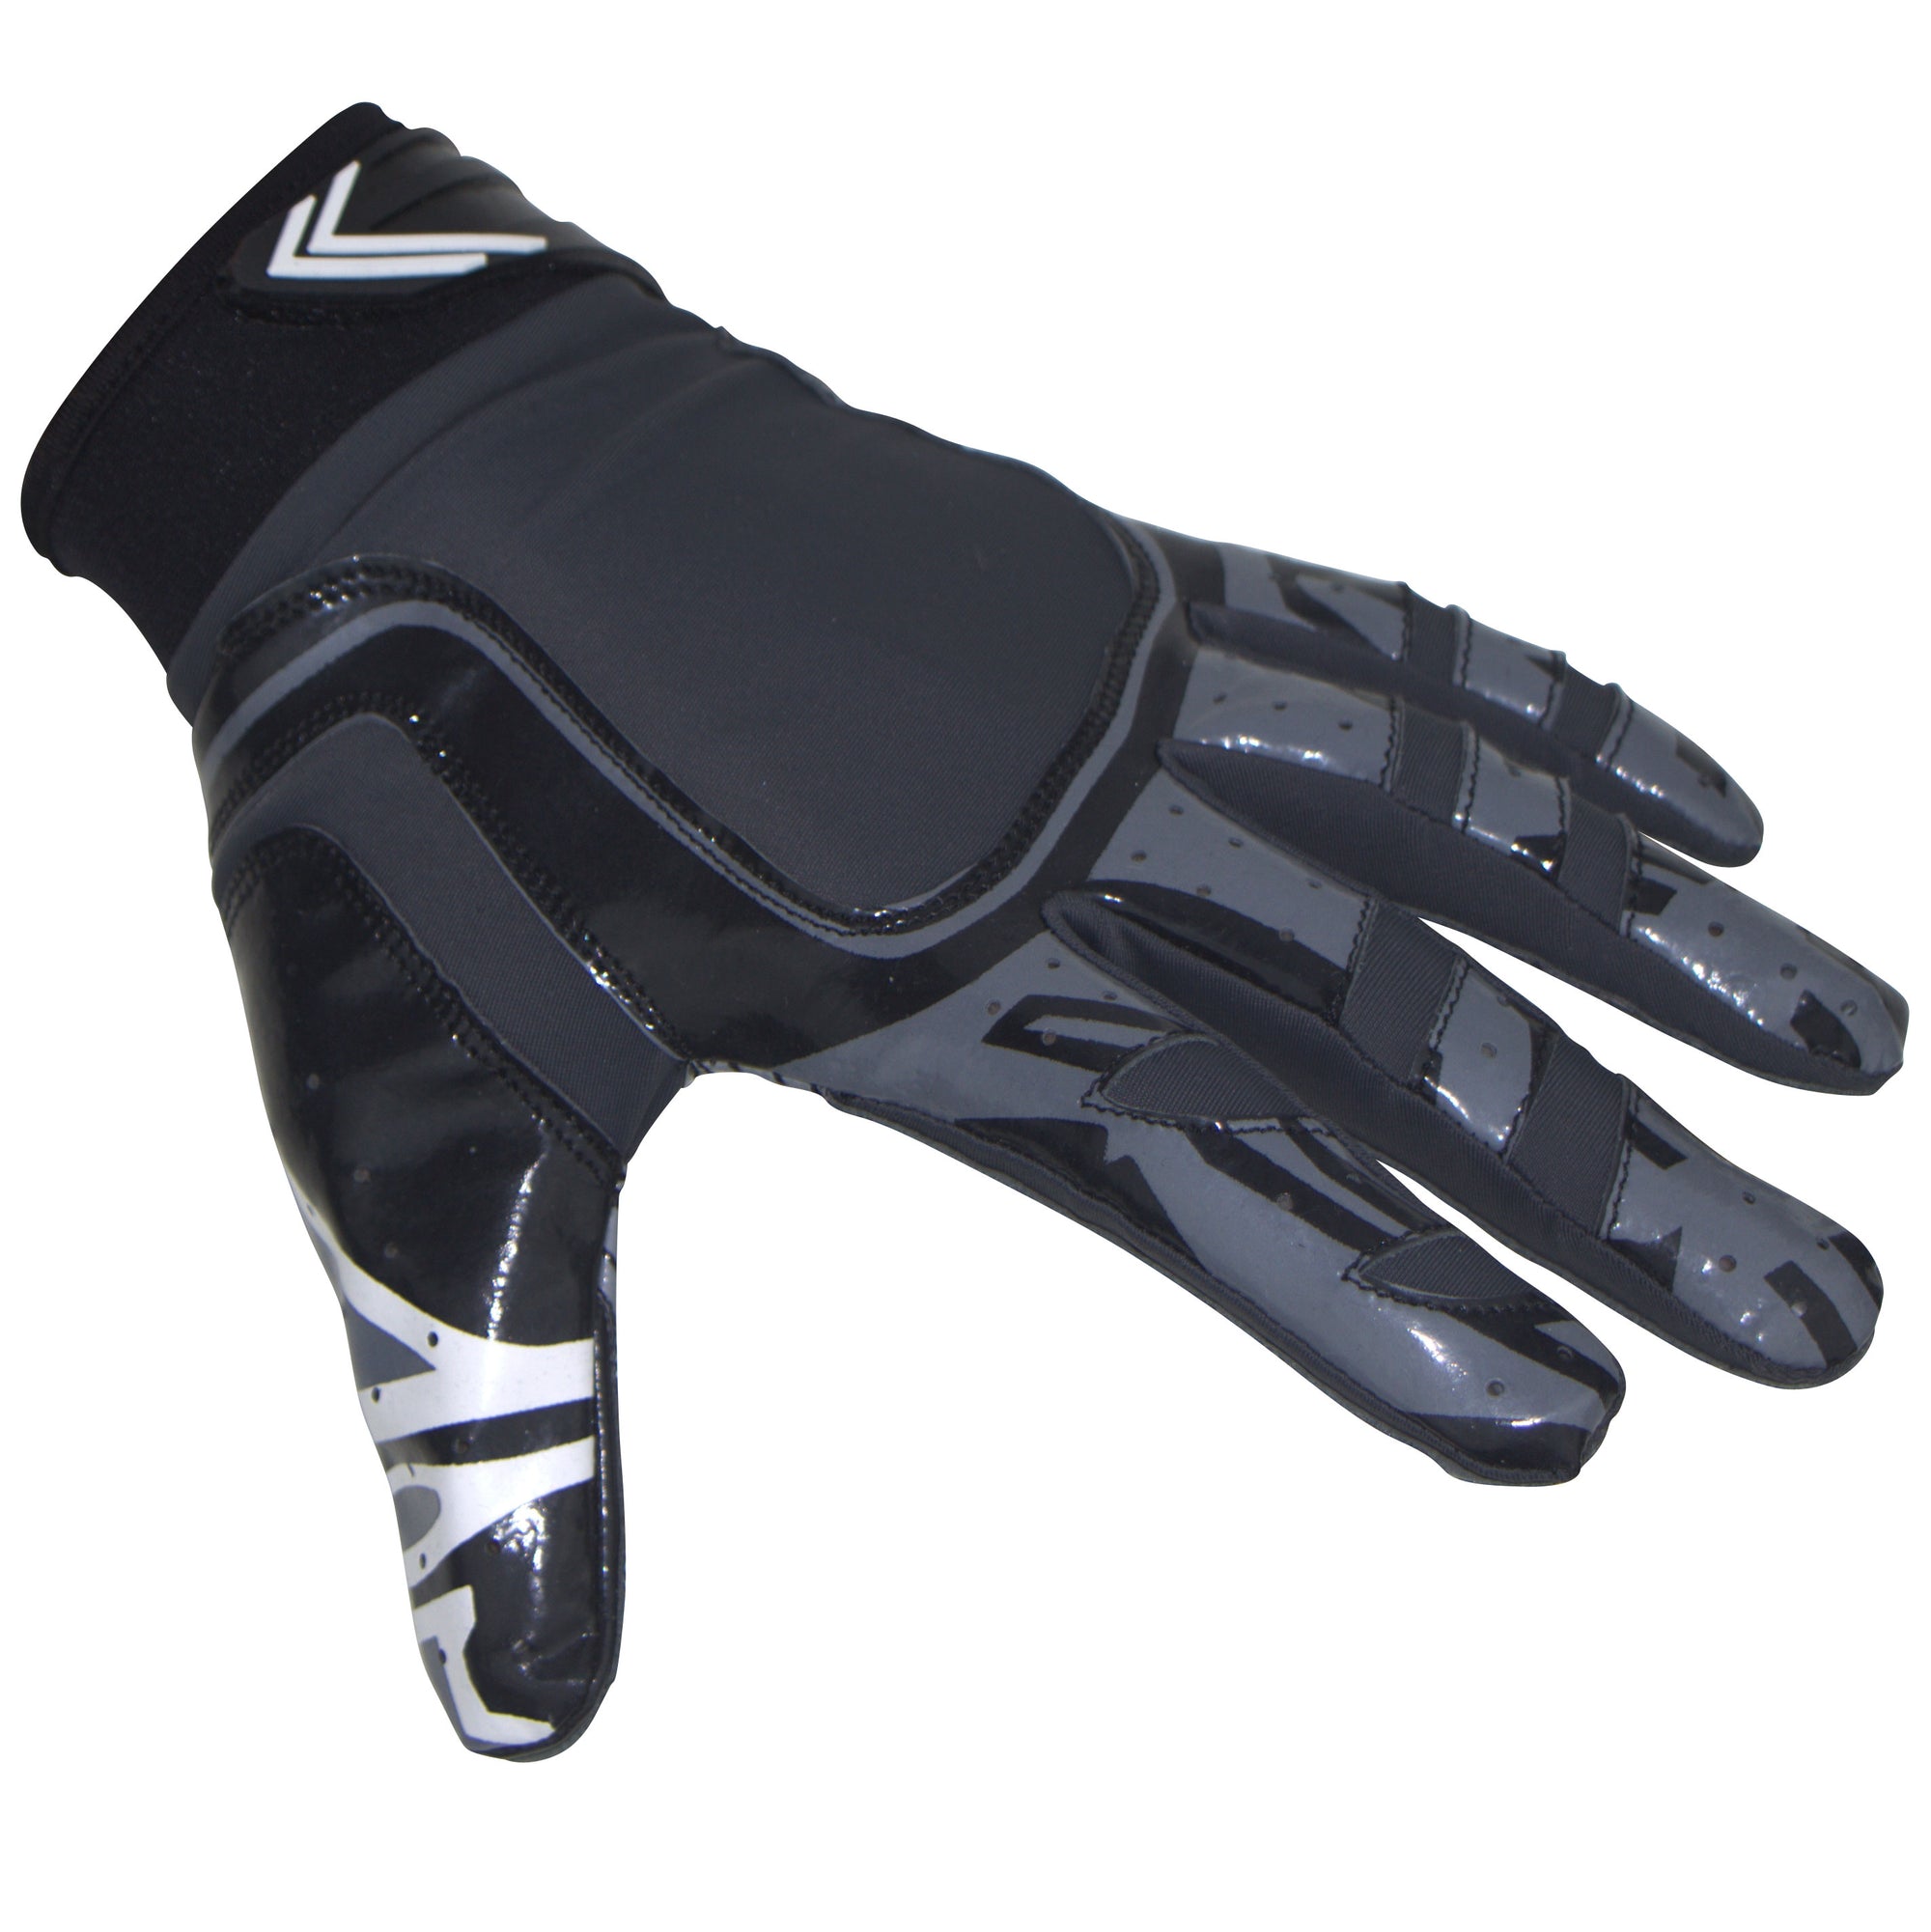 Youth Football Receiver Gloves